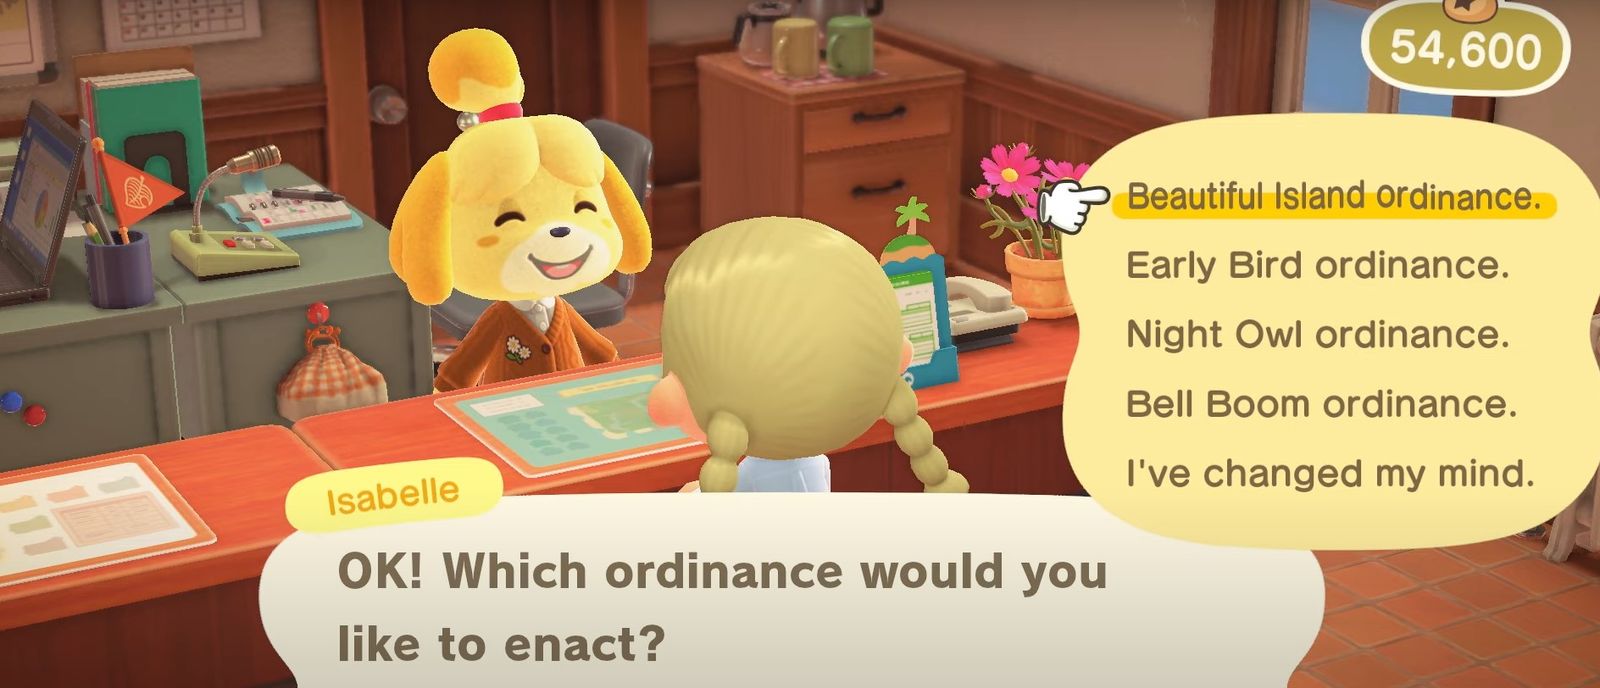 The Resident Representative in Animal Crossing: New Horizons can enact Island Ordinances when speaking with Isabelle.